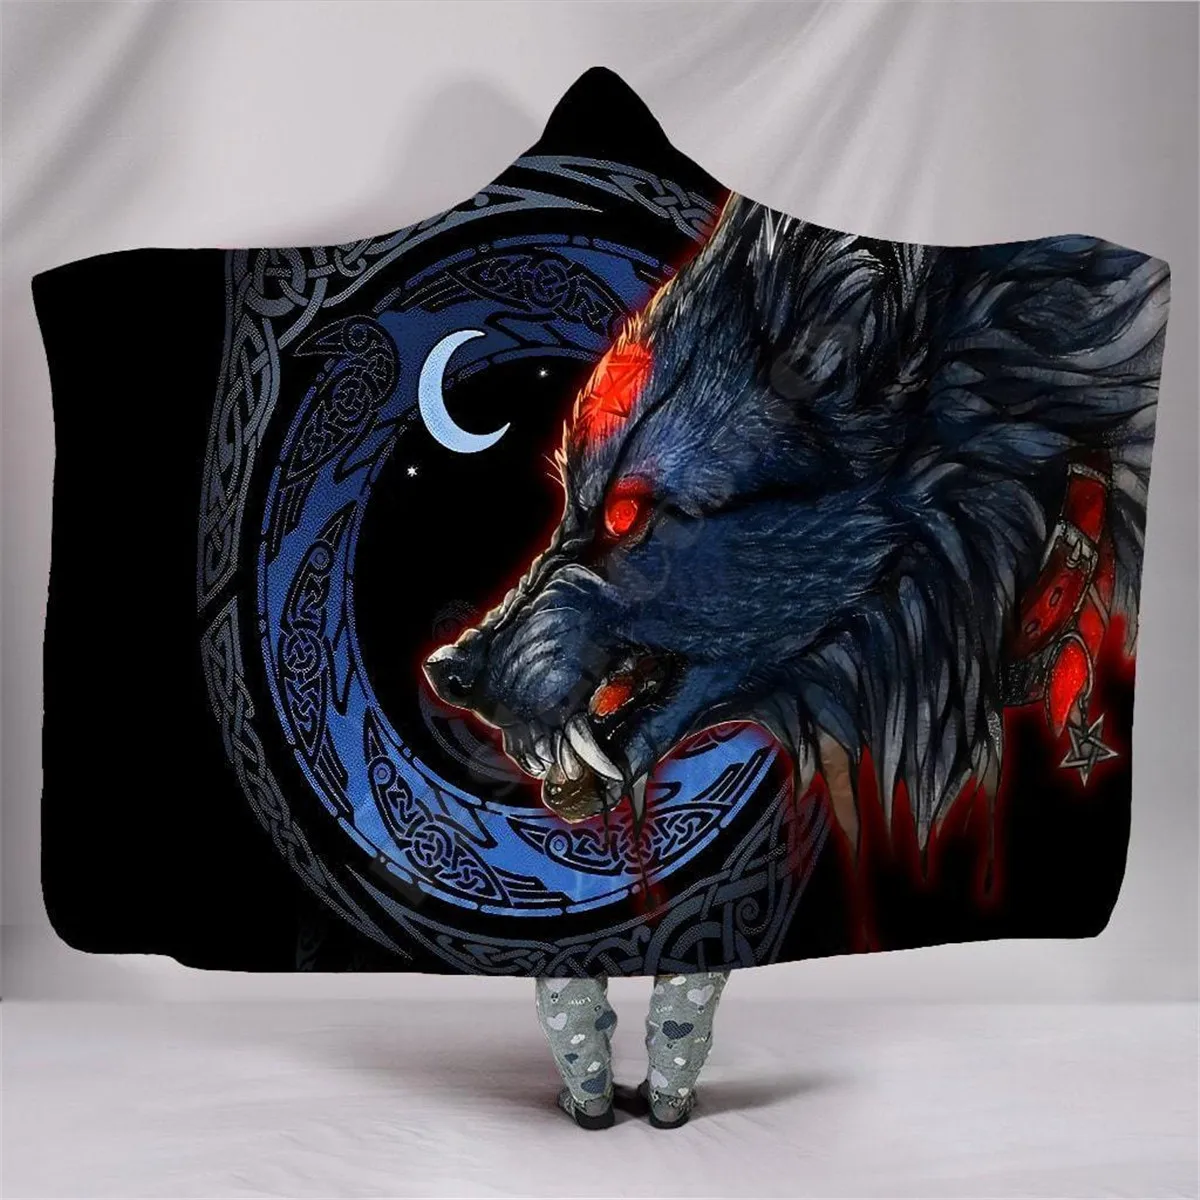 

Fenrir Viking Wolf 3d Printed Hooded Blanket Adult Kids Sherpa Fleece Blanket Cuddle Offices in Cold Weather Gorgeous